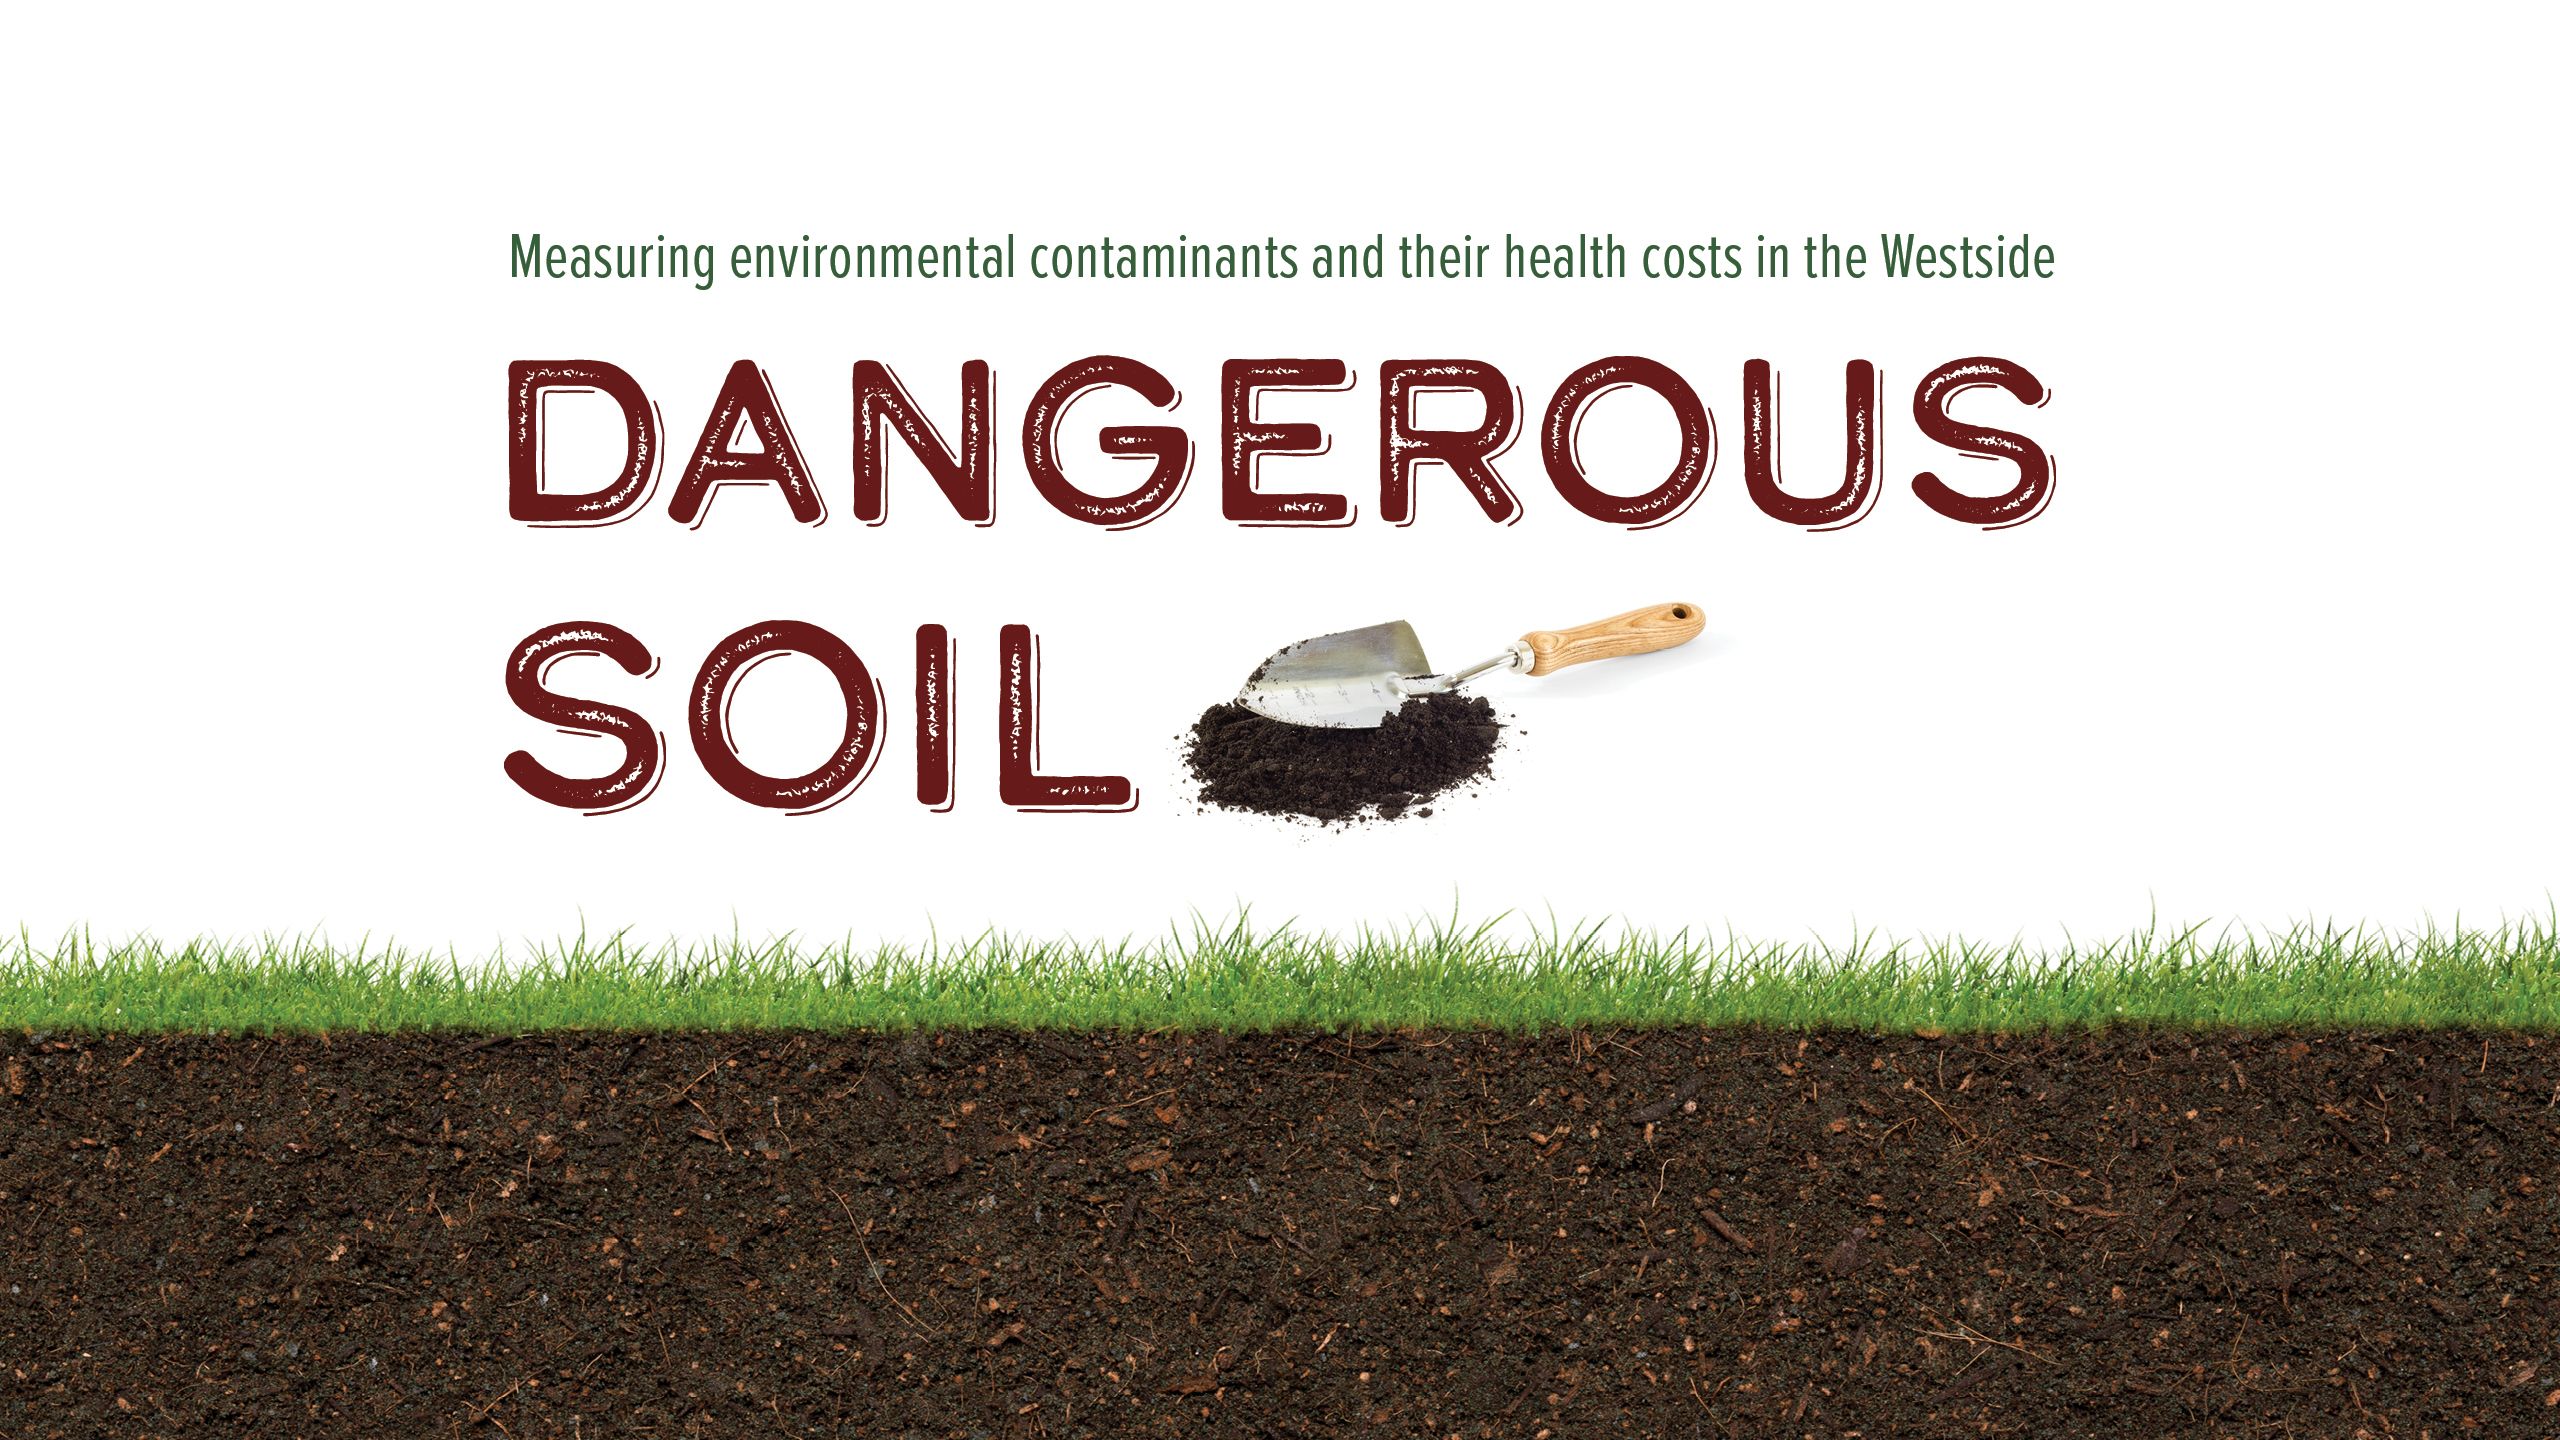 A cover art illustration with a stock image of a soil and a trowel scooping up soil. It has text on the top that reads Measuring environmnetal contaminants and their health costs in the Westside Dangerous Soil.